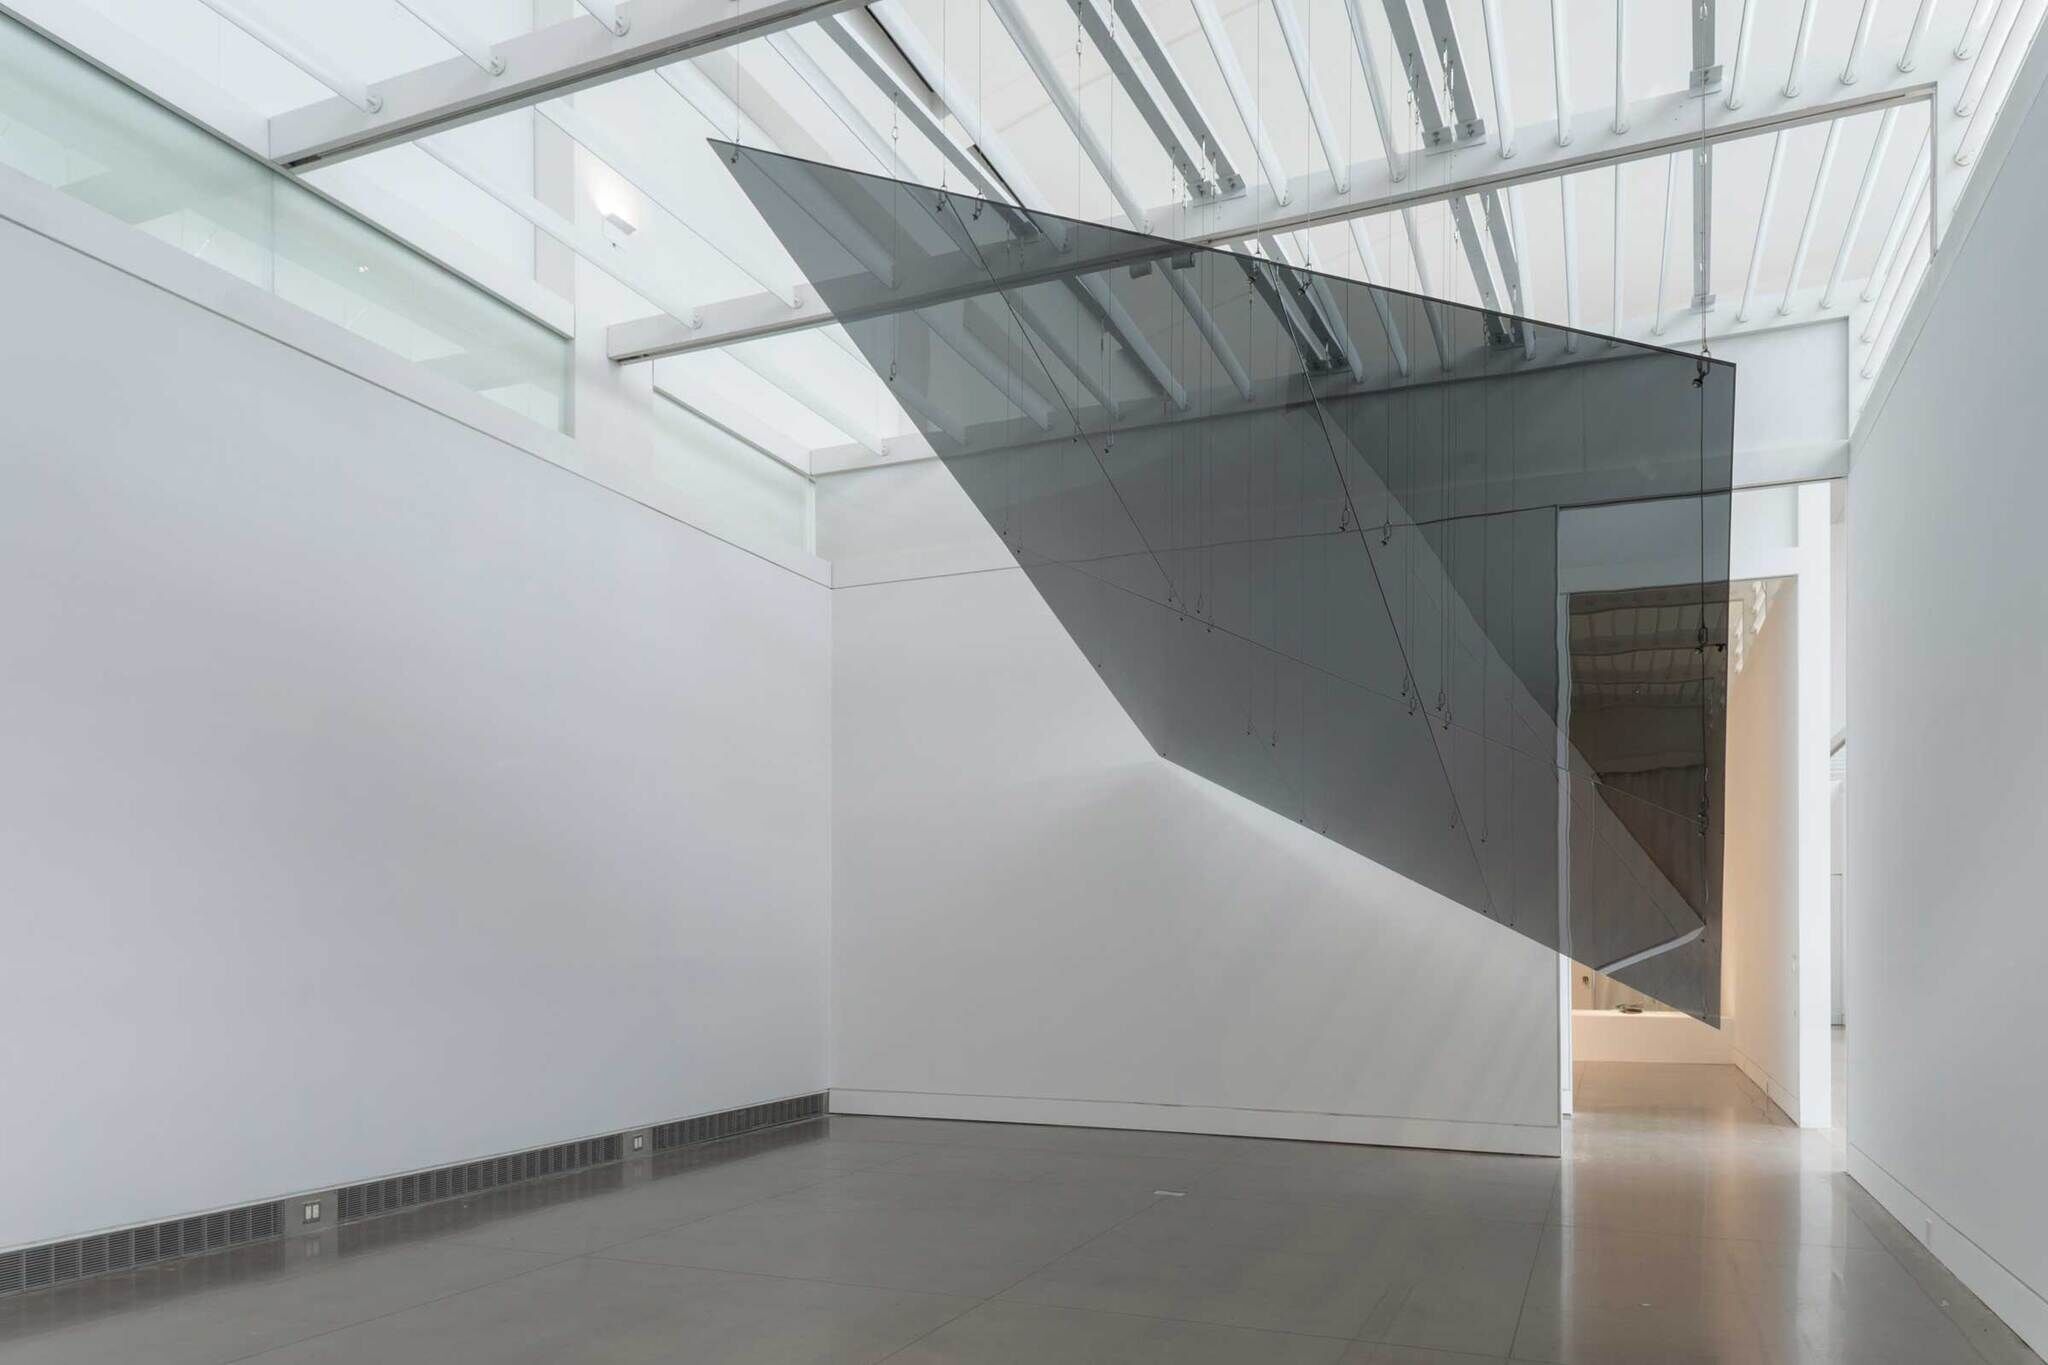 Modern gallery interior with a large, angled, reflective art installation suspended from the ceiling.